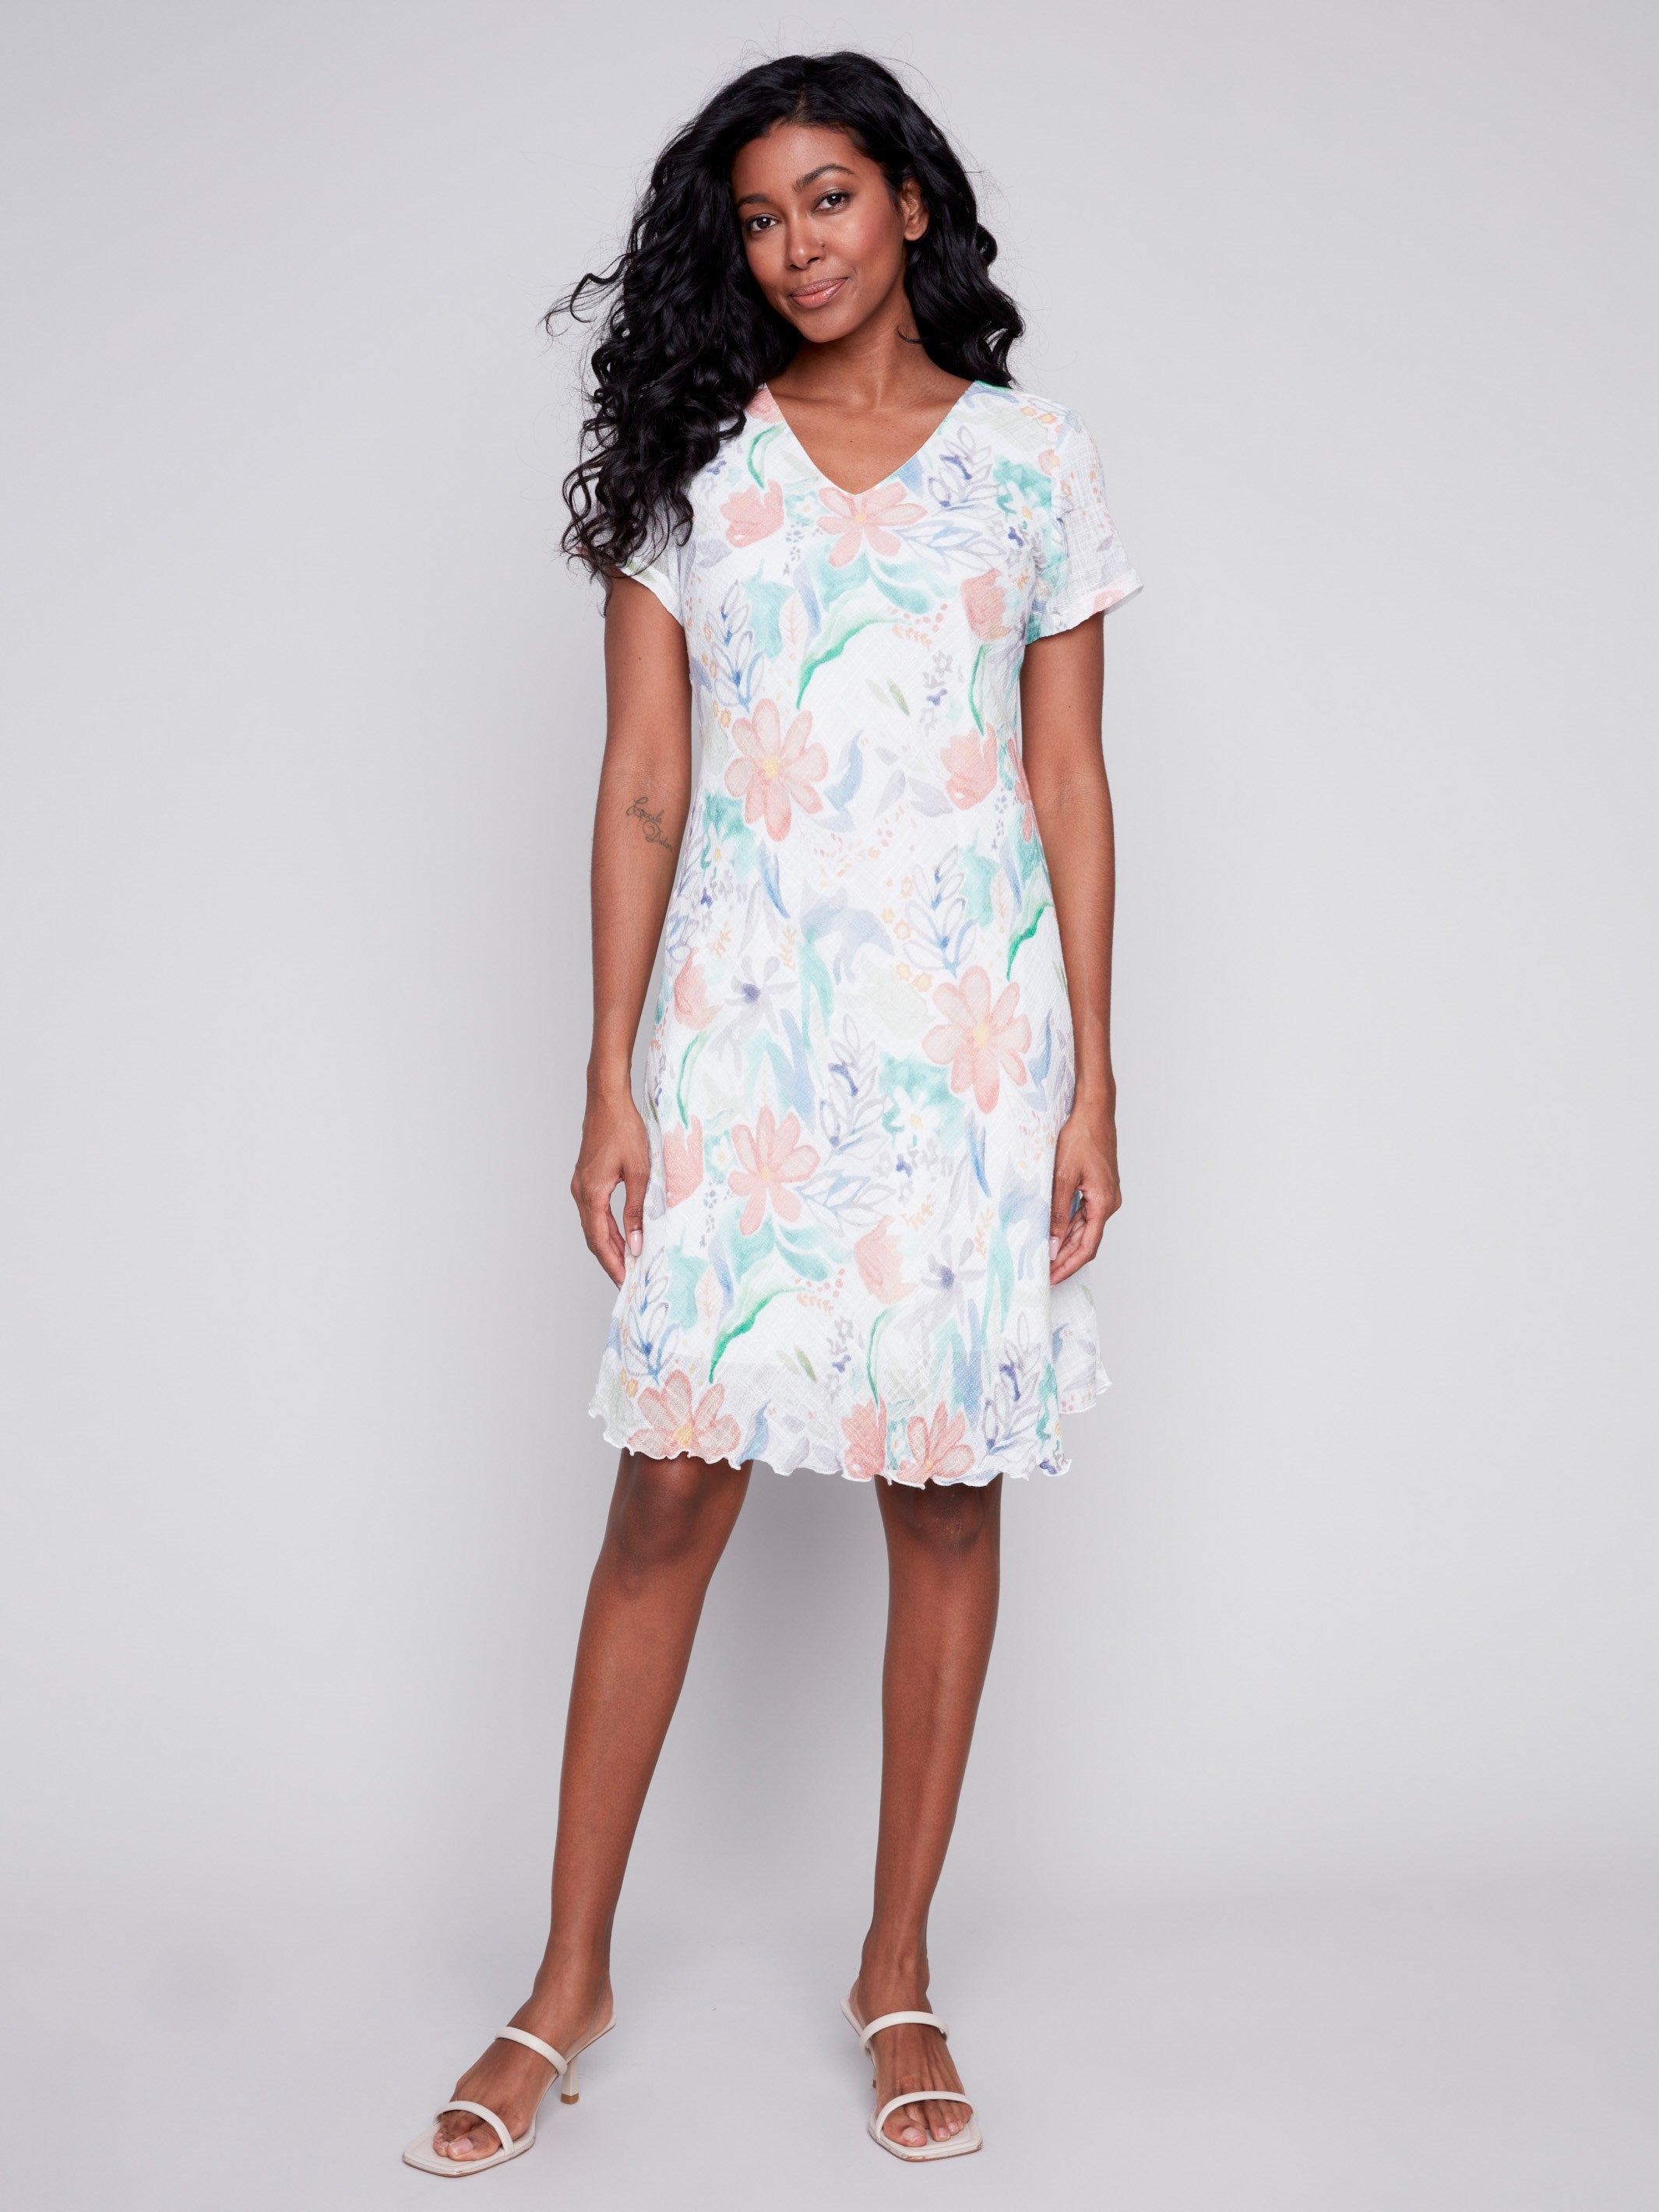 Cotton Gauze Dress with Bias Cut - Lotus - Charlie B Collection Canada - Image 3